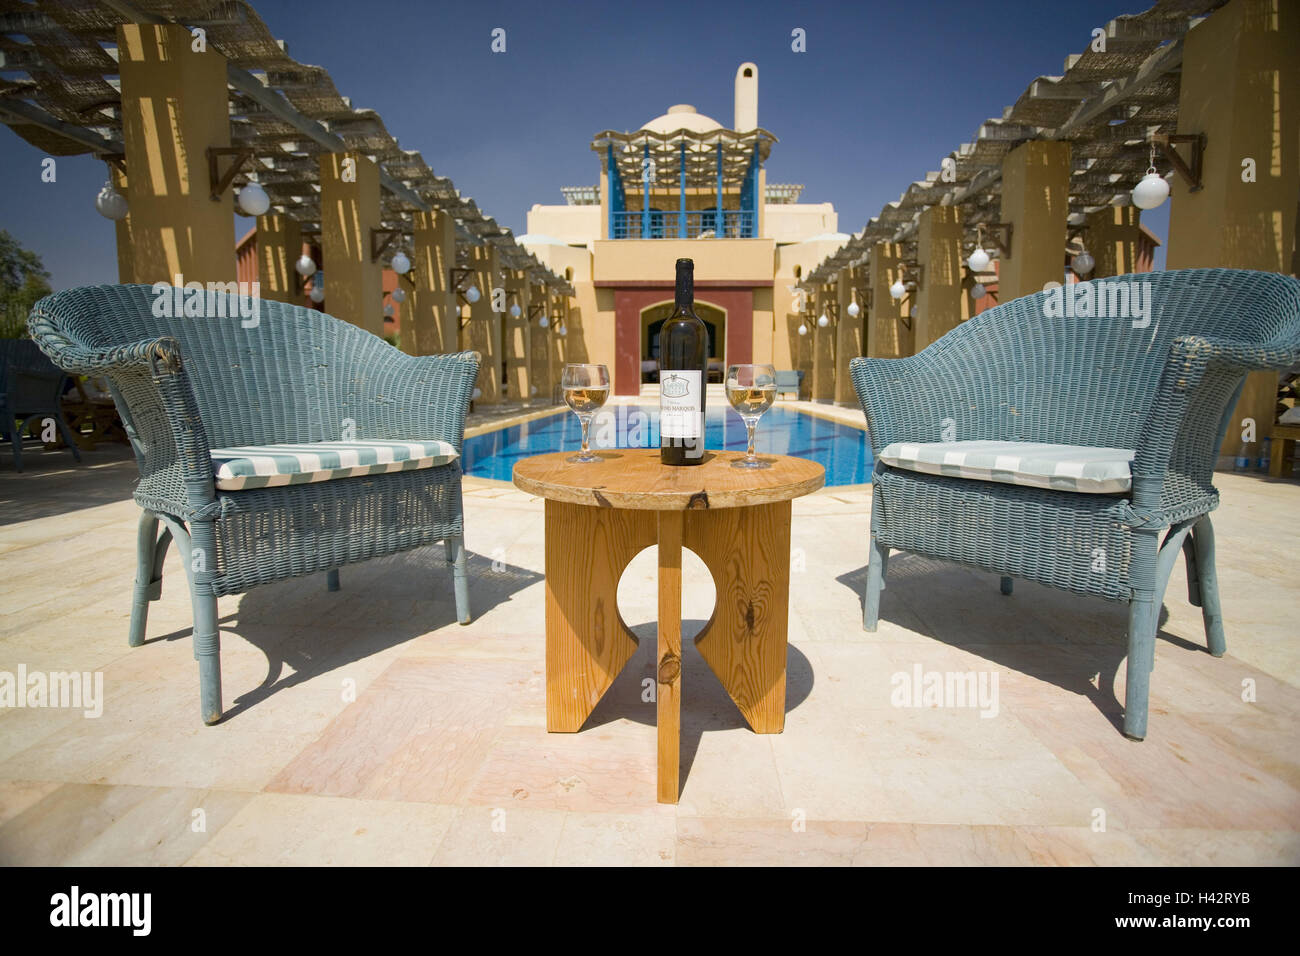 Egypt, tablespoon Gouna, Sheraton-Miramar Resort, pool, chairs, table, wine-wrong, glasses, destination, hotel, hotel building, architecture, swimming pool, vacation, oasis, recreation, heat, sunny, armchair, travelling, heavens, rest, deserted, loneliness, outside, Stock Photo